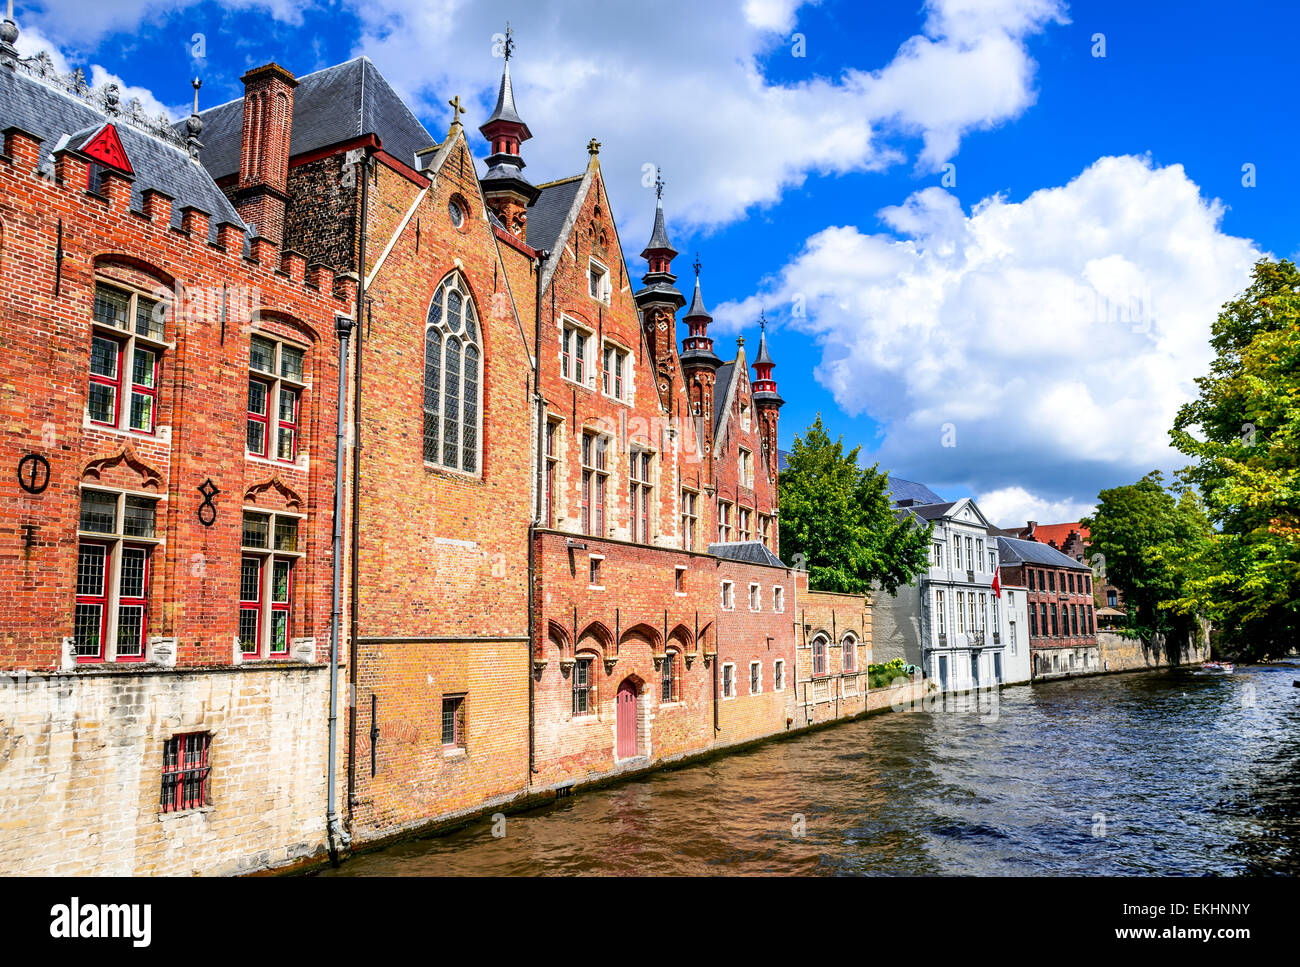 Bruges, Belgium. Summer scenery with gothic style houses and Groenerei water canal in Flanders medieval city of Brugge. Stock Photo